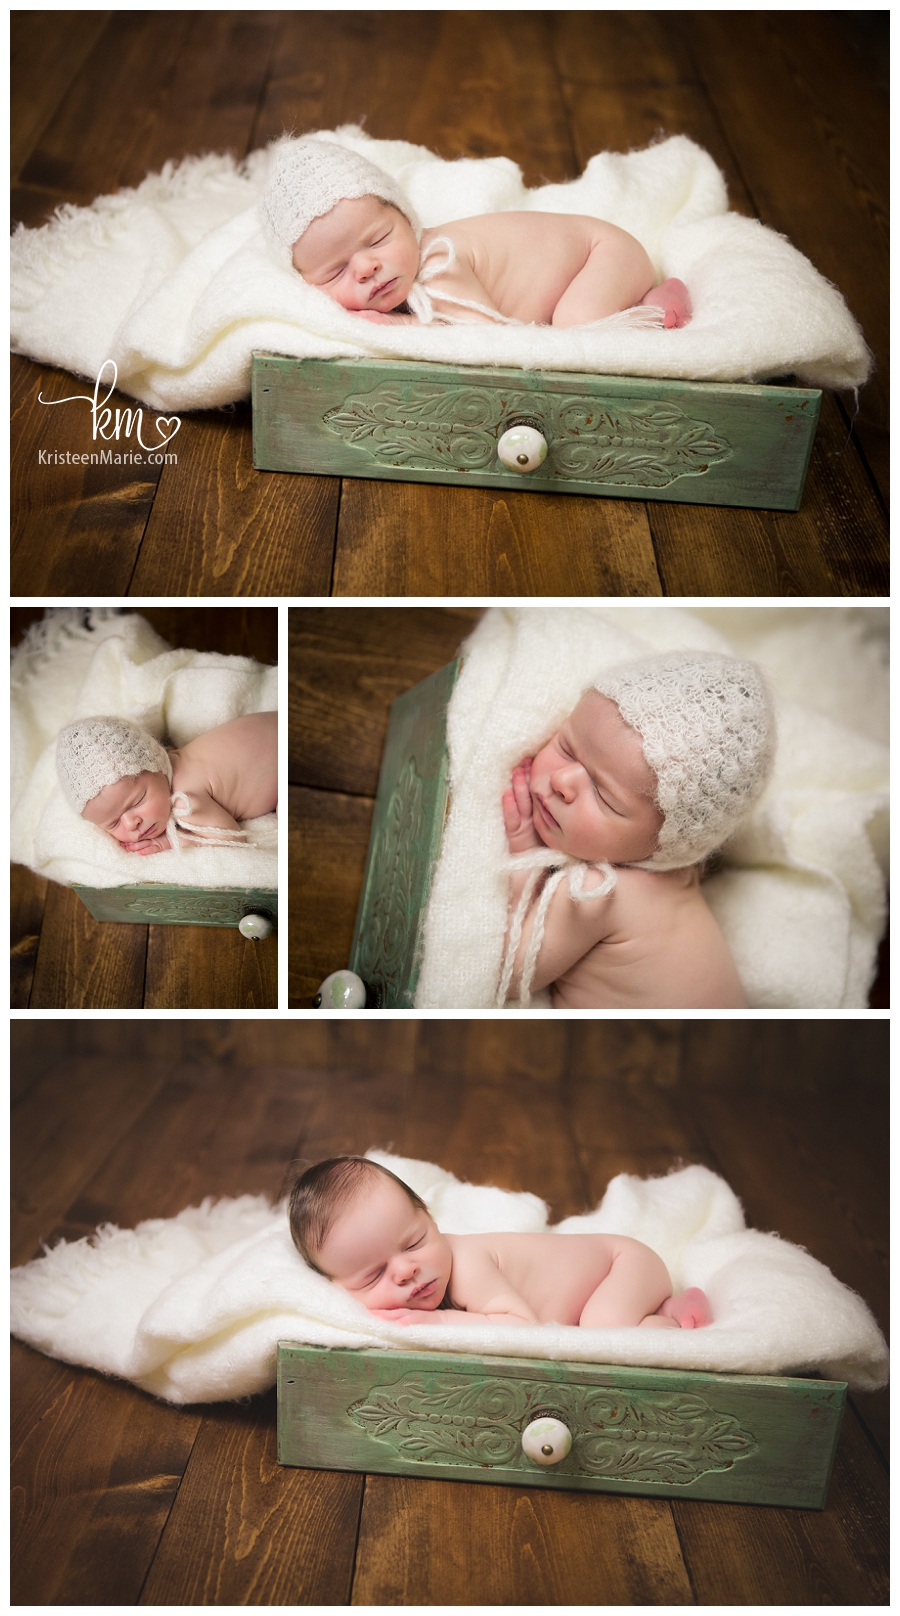 Did babies really used to sleep in drawers? · KristeenMarie Photography